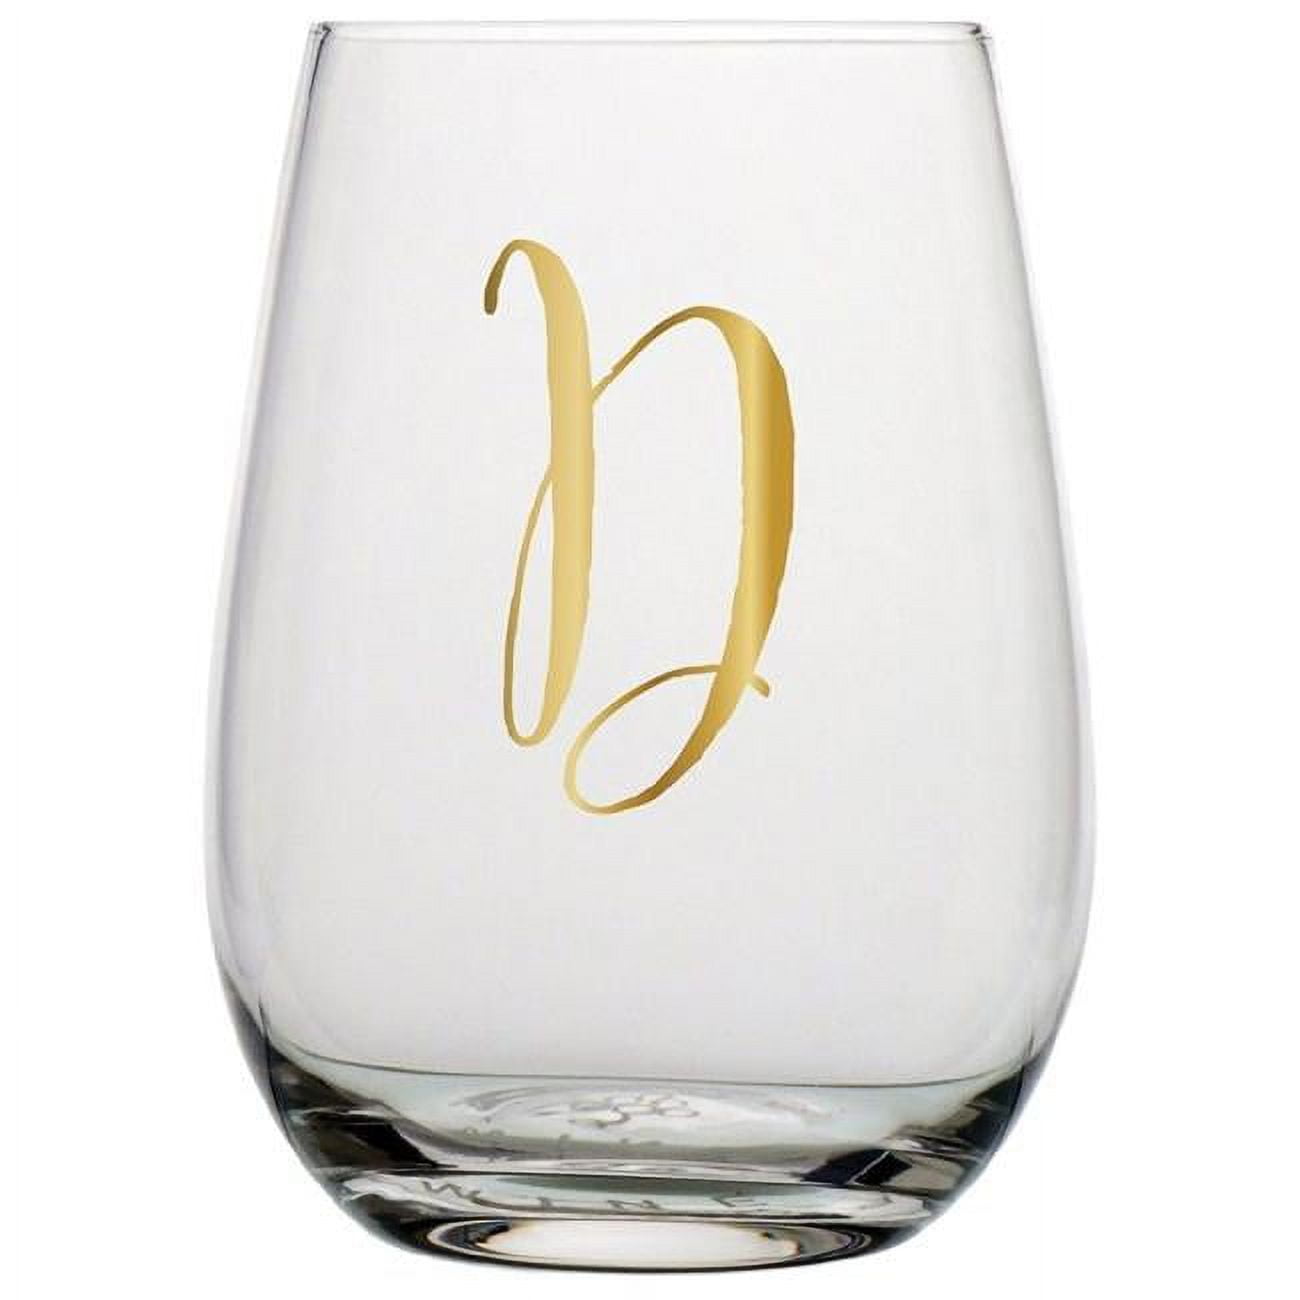 Teal Monogram Letter Stemless Wine Glass with Insulated Lid - K 